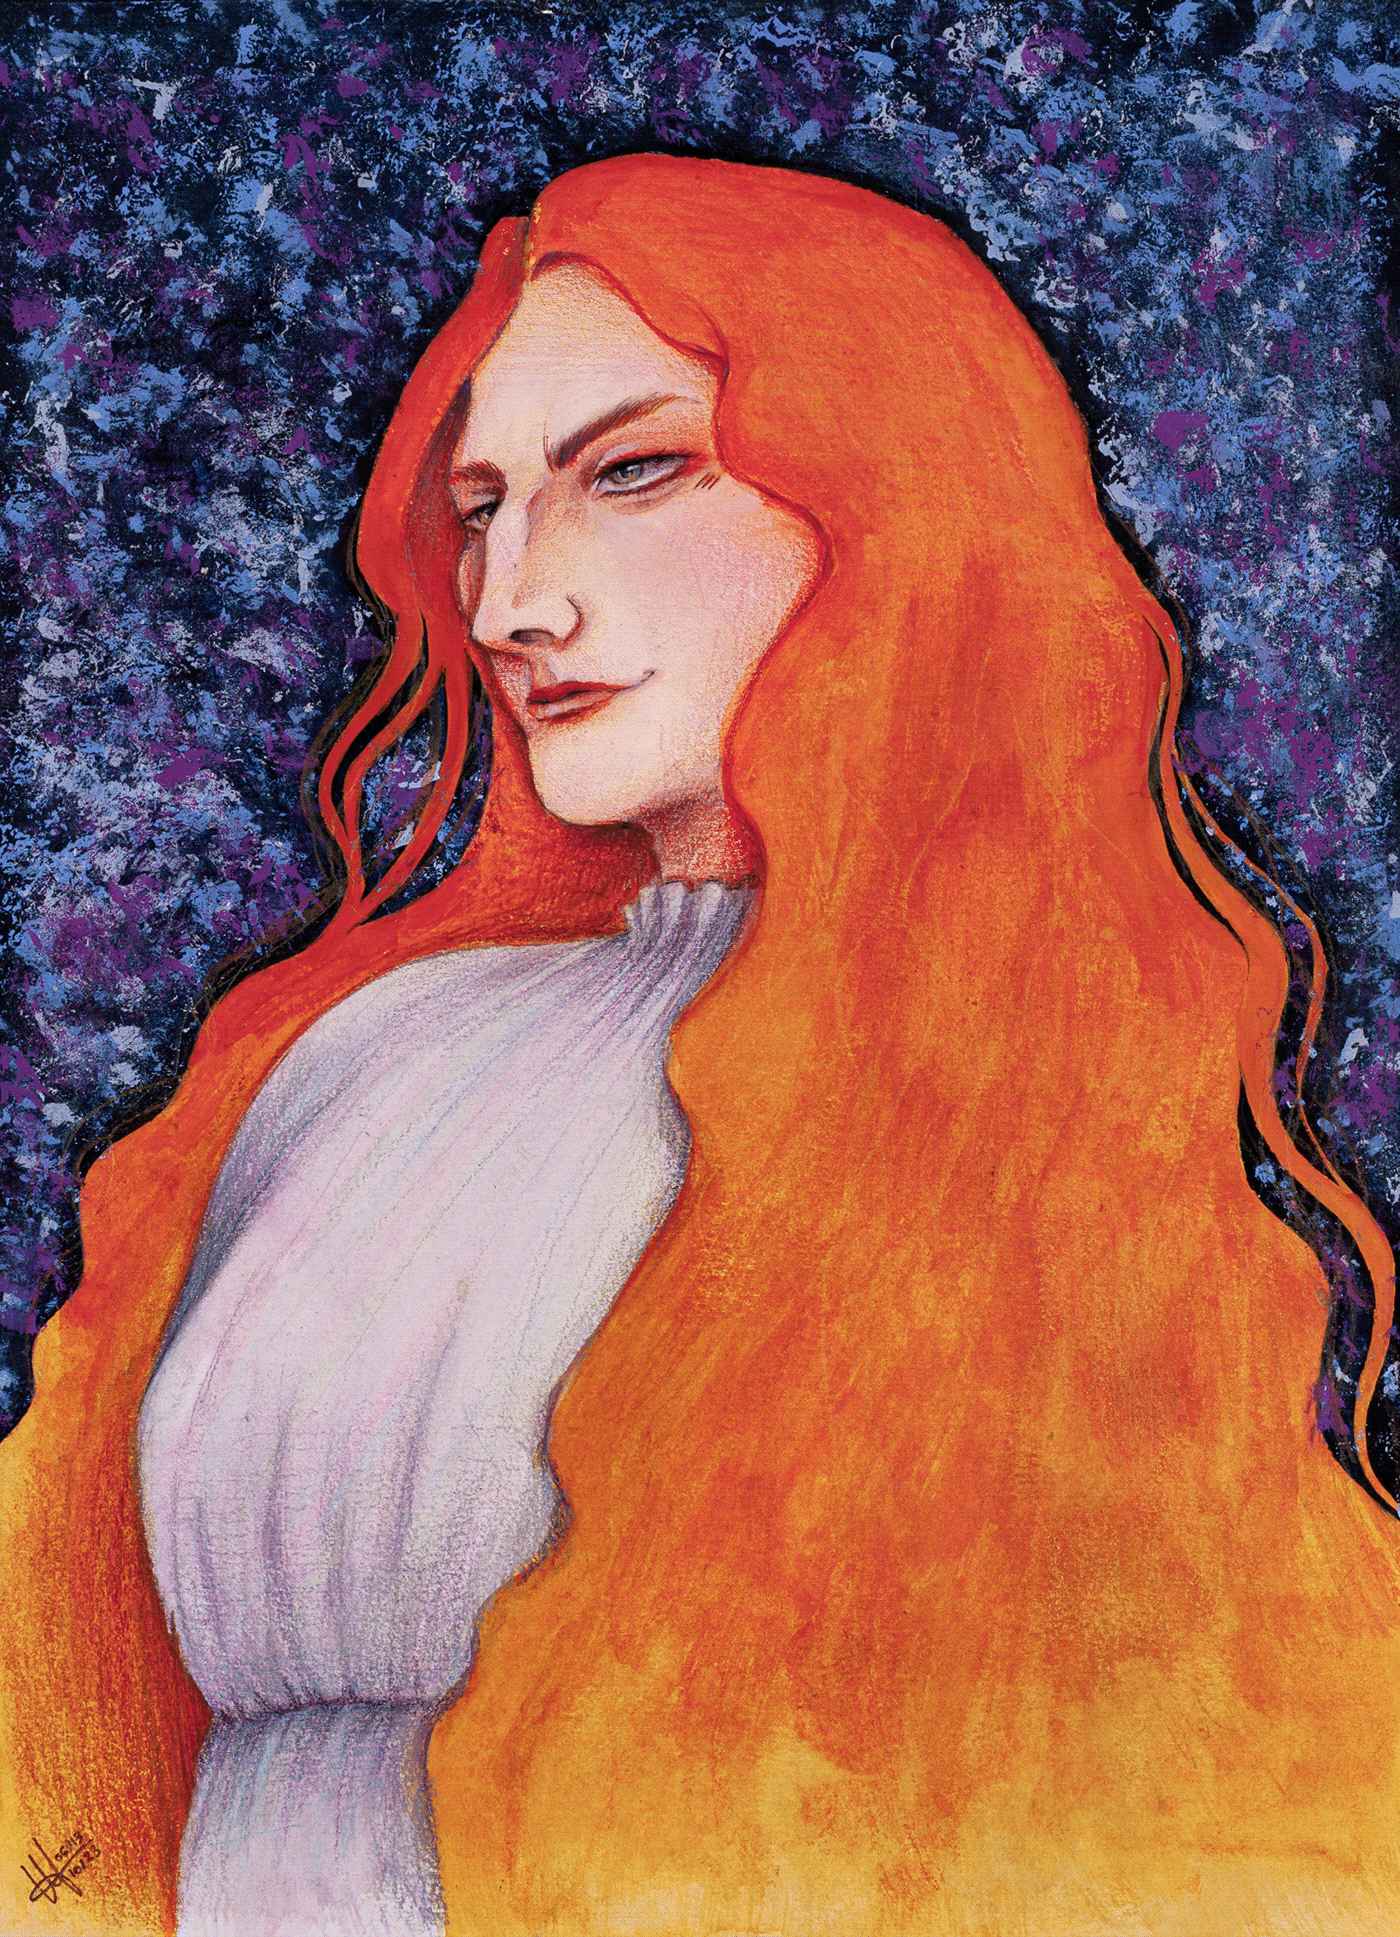 TRADITIONAL ART Traditional artwork School Work School Project personal art personal artwork portrait florence and the machine Florence Welch watercolour painting